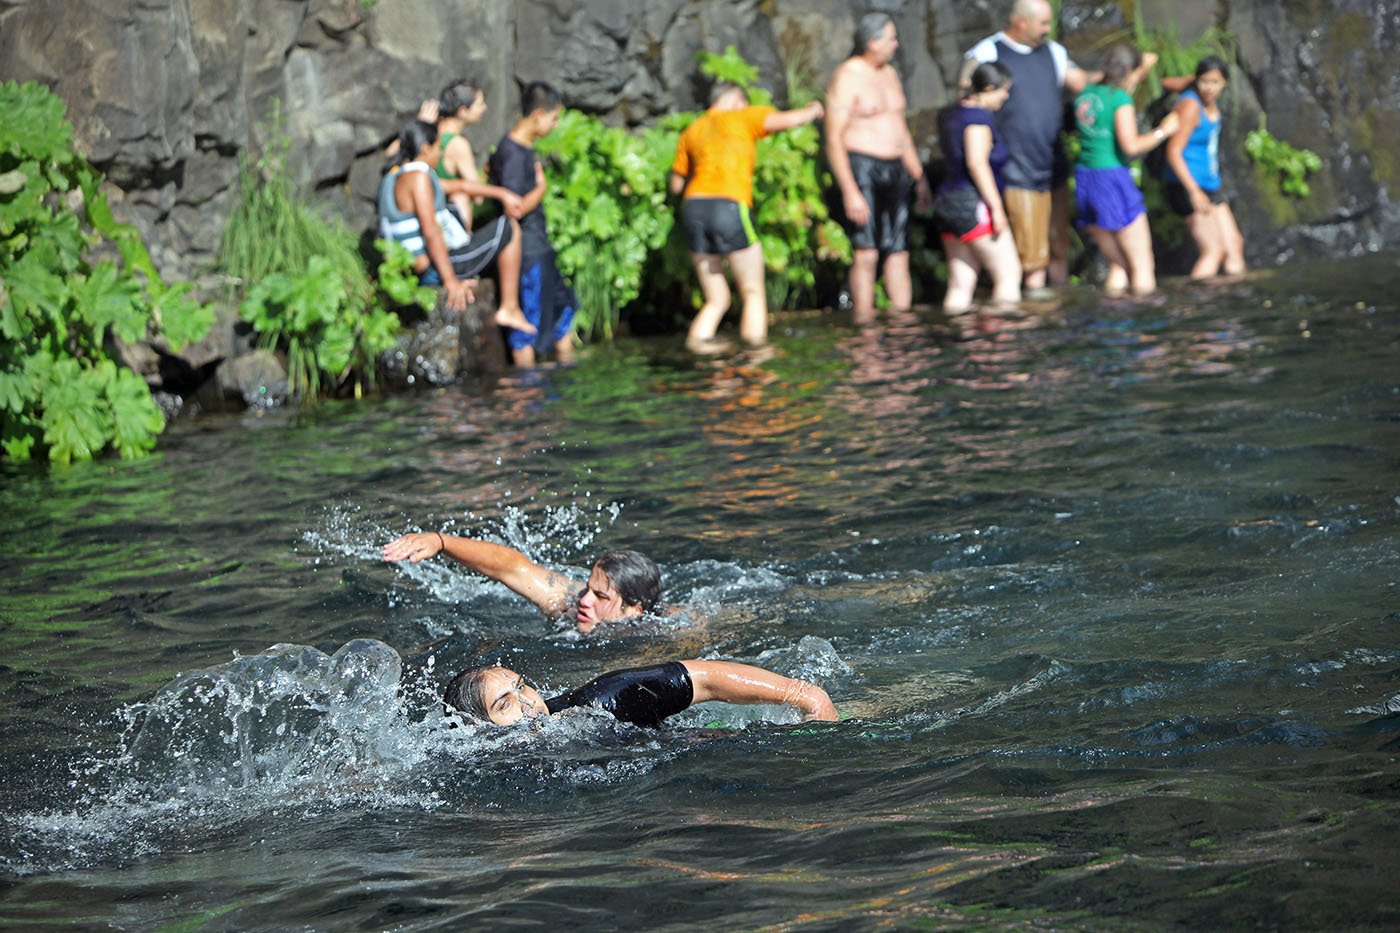  Lower McCloud River Falls, CA — After jumping in the deep pool, swimmers make their way back to the banks of the river. July 10, 2019.  Tom Levy/The Spiritual Edge 